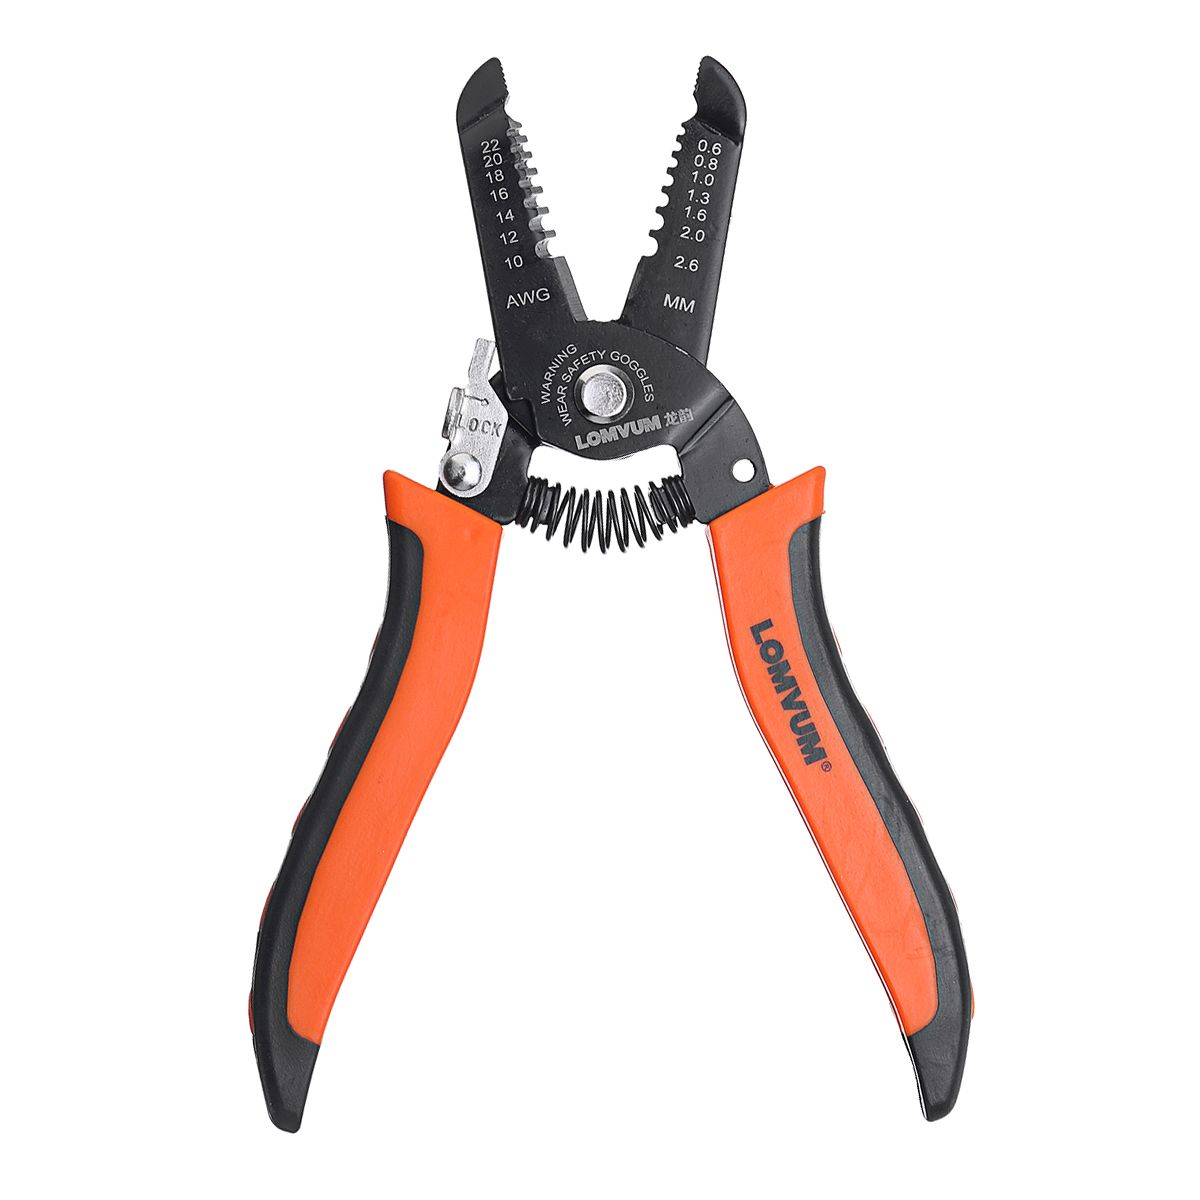 Multifunction-Wire-Stripper-Cutter-Crimper-Professional-Cable-Stripping-1543729